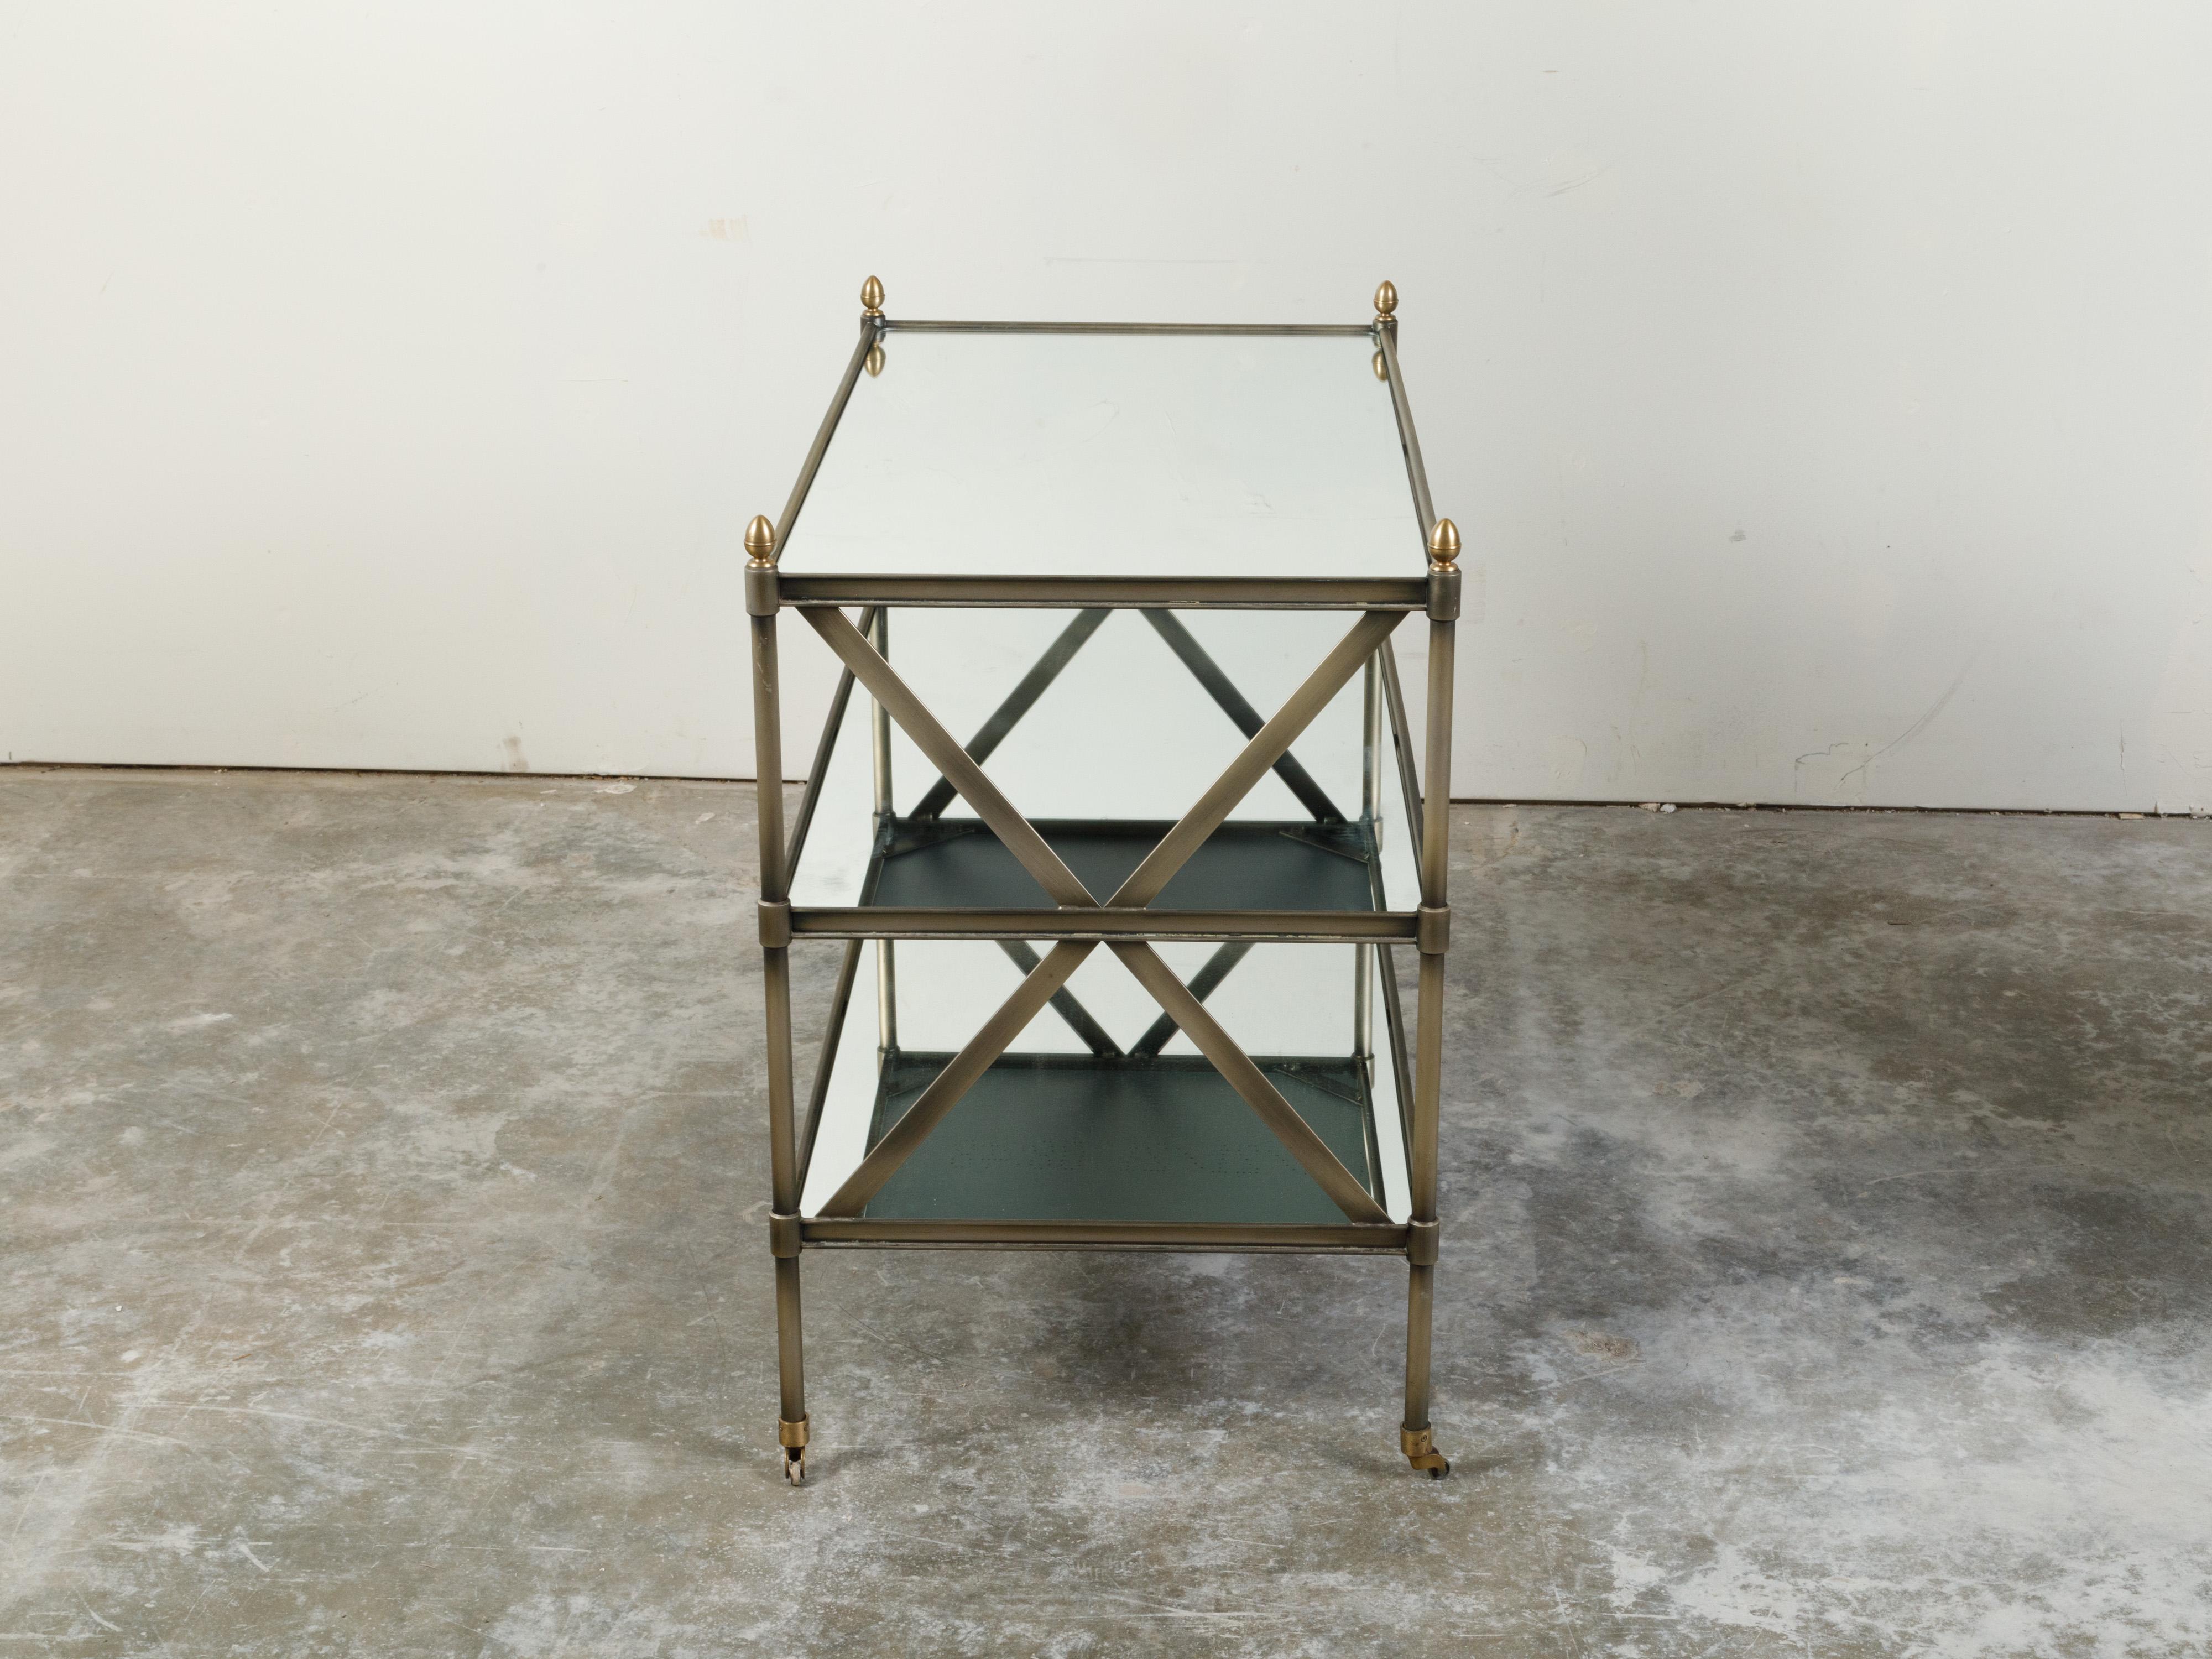 Italian Midcentury Patinated Metal Trolley with Mirrored Shelves and Casters For Sale 2